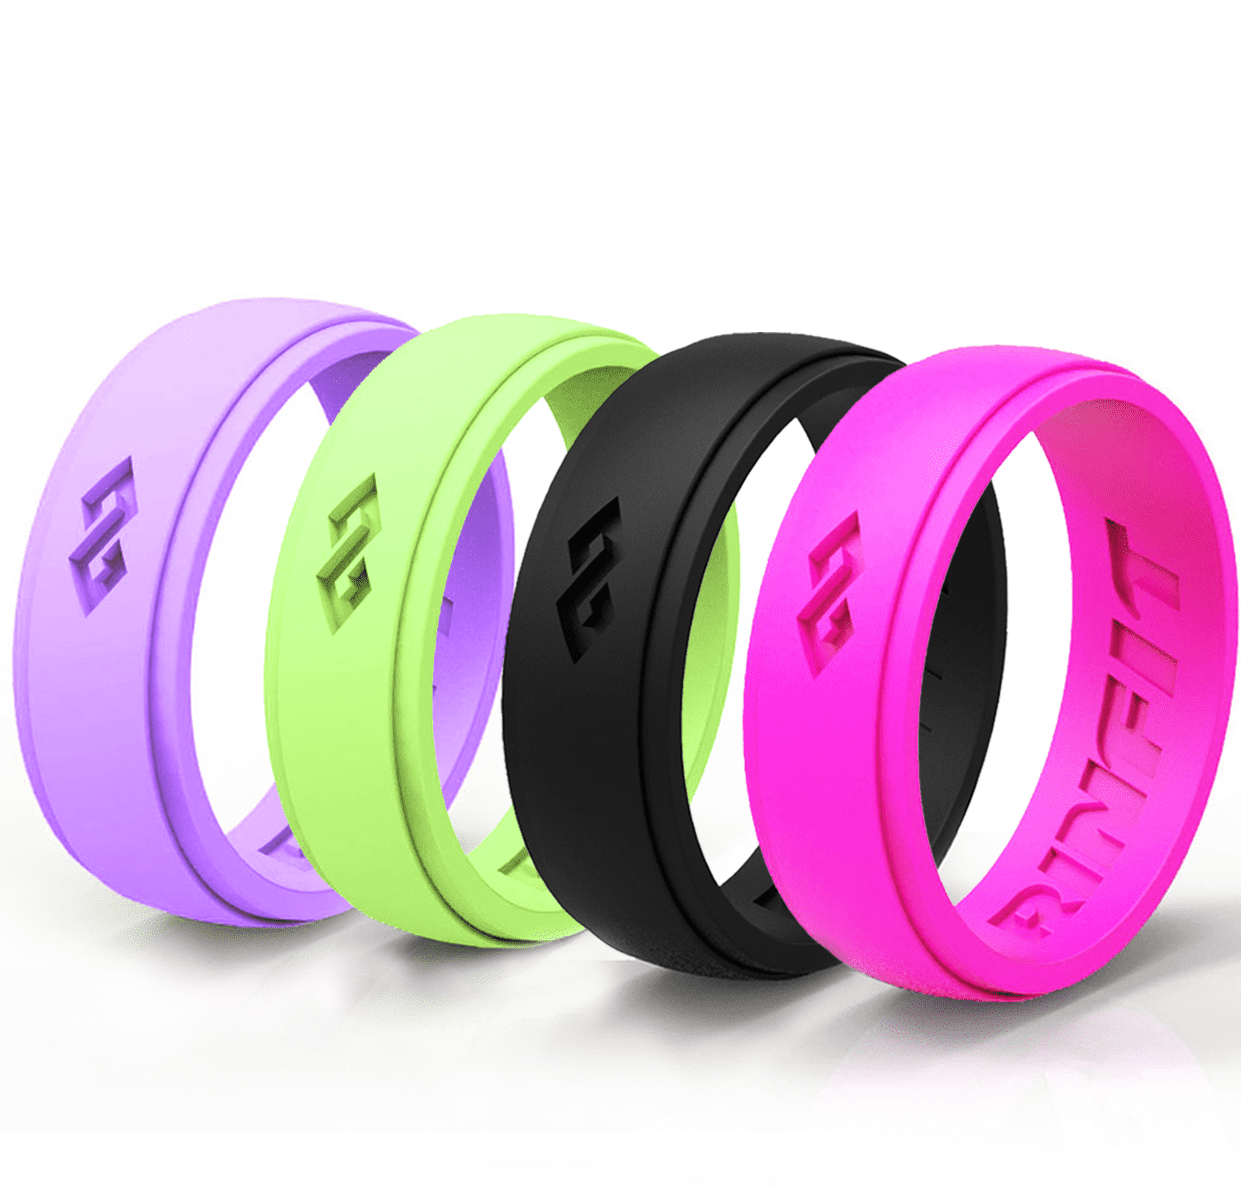 Keelyn Silicone Wedding Ring 10 Pack Rubber Engagement Ring Comfortable Flexible Durable Skin Safe Non-Toxic Antibacterial Premium Medical Grade Silicone Wedding Band 